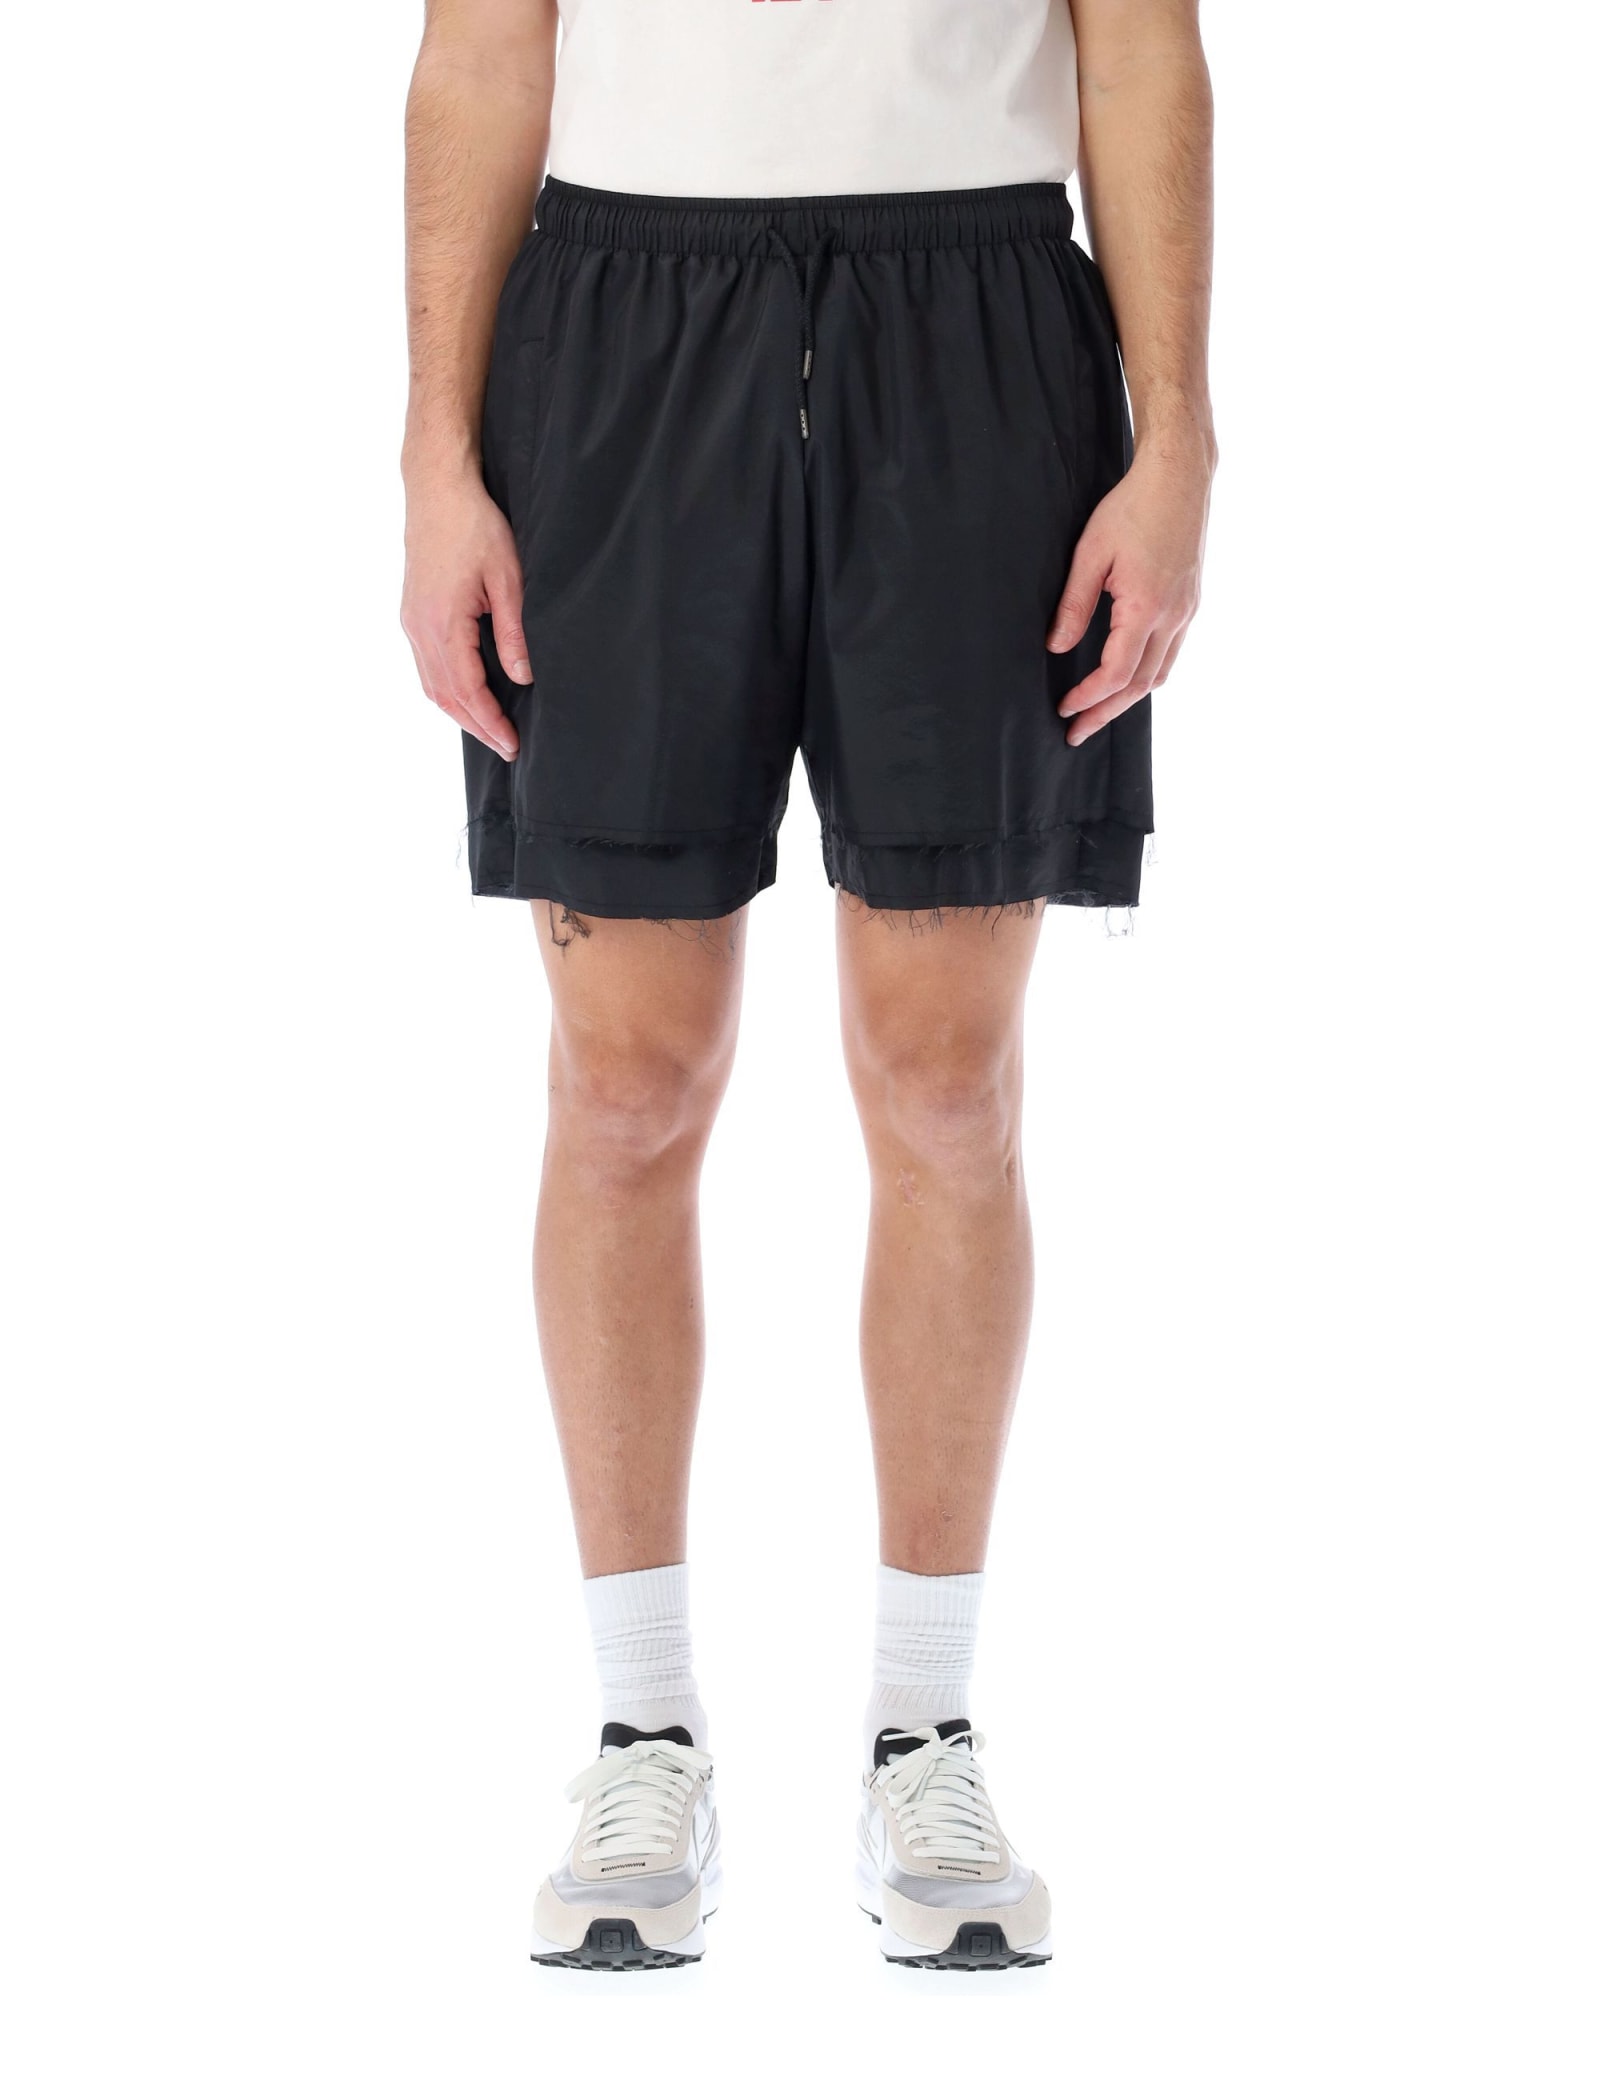 FourTwoFour on Fairfax Double Layer Shorts